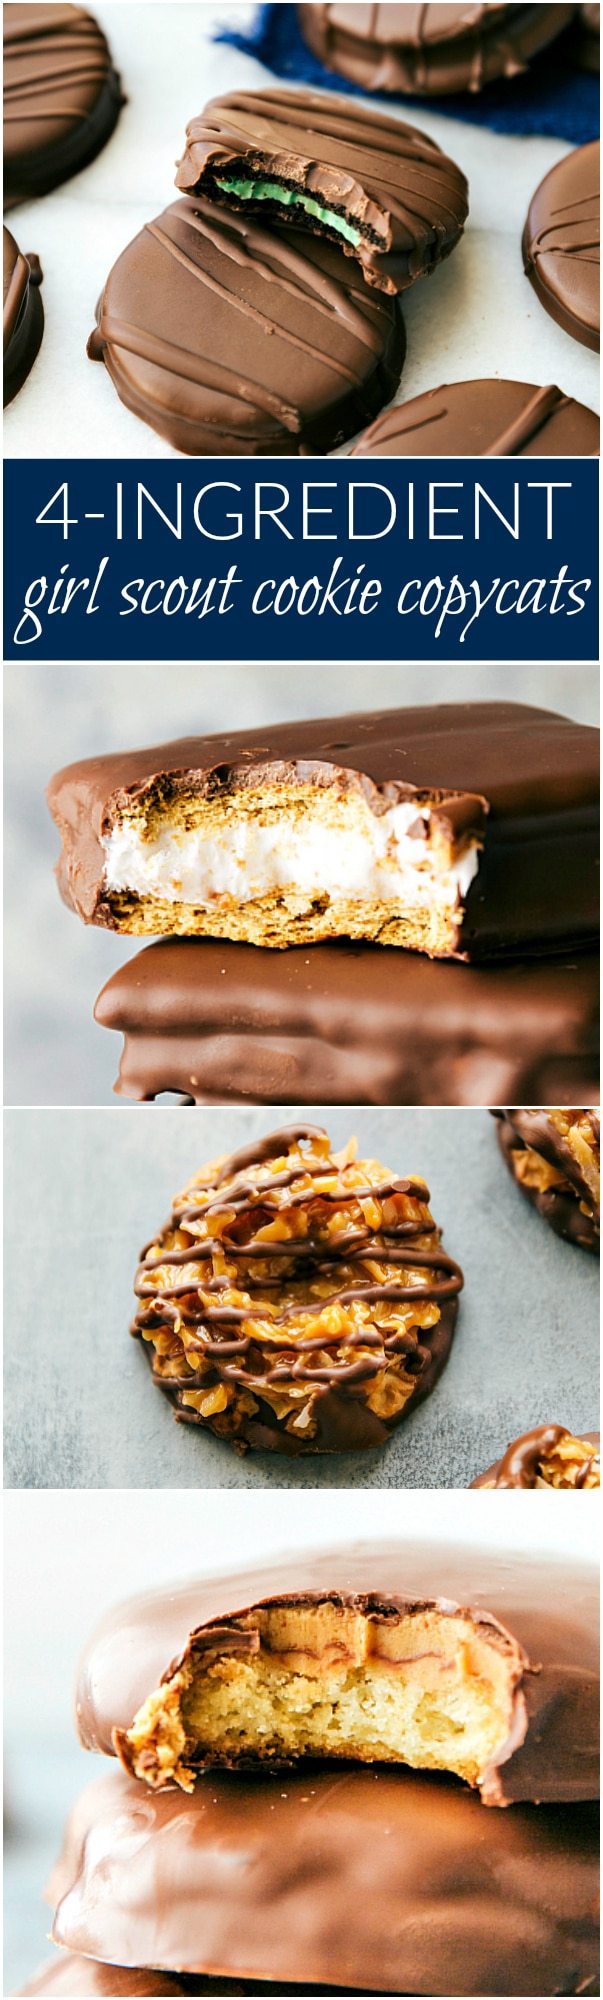 A collection of four different and simple Girl Scout Cookie copycats all with 4-ingredients OR less! Thin Mints, S'mores Sandwich Cookies, S'amoas, and Tagalongs! via chelseasmessyapron.com